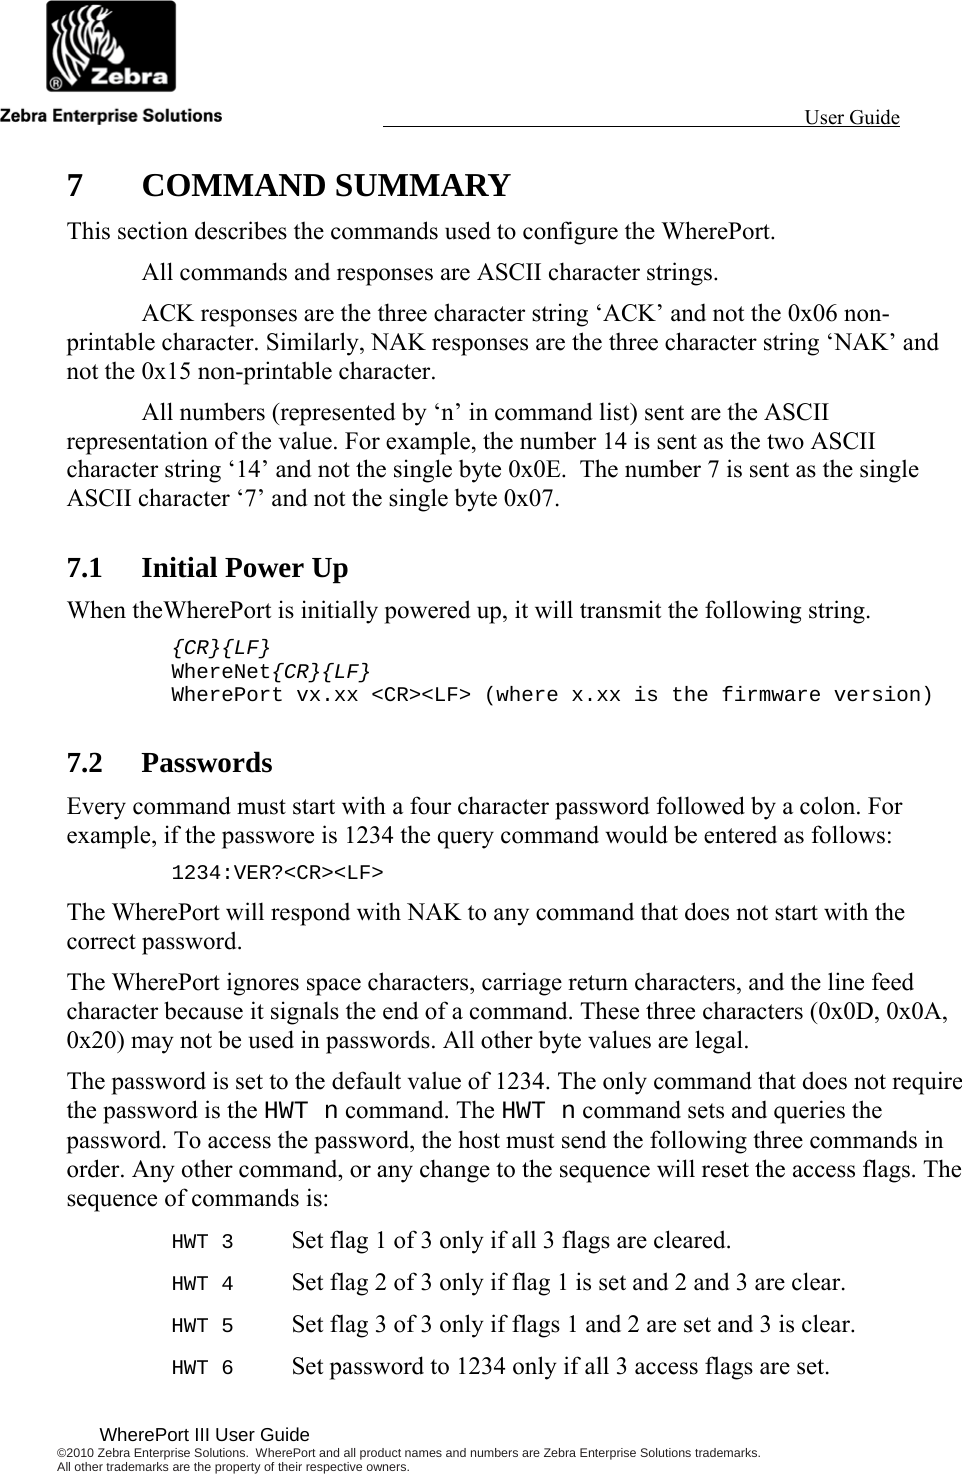                                                                                                                 User Guide                                              WherePort III User Guide ©2010 Zebra Enterprise Solutions.  WherePort and all product names and numbers are Zebra Enterprise Solutions trademarks.  All other trademarks are the property of their respective owners.   7 COMMAND SUMMARY This section describes the commands used to configure the WherePort.    All commands and responses are ASCII character strings.   ACK responses are the three character string ‘ACK’ and not the 0x06 non-printable character. Similarly, NAK responses are the three character string ‘NAK’ and not the 0x15 non-printable character.   All numbers (represented by ‘n’ in command list) sent are the ASCII representation of the value. For example, the number 14 is sent as the two ASCII character string ‘14’ and not the single byte 0x0E.  The number 7 is sent as the single ASCII character ‘7’ and not the single byte 0x07. 7.1 Initial Power Up When theWherePort is initially powered up, it will transmit the following string. {CR}{LF} WhereNet{CR}{LF} WherePort vx.xx &lt;CR&gt;&lt;LF&gt; (where x.xx is the firmware version) 7.2 Passwords Every command must start with a four character password followed by a colon. For example, if the passwore is 1234 the query command would be entered as follows: 1234:VER?&lt;CR&gt;&lt;LF&gt; The WherePort will respond with NAK to any command that does not start with the correct password. The WherePort ignores space characters, carriage return characters, and the line feed character because it signals the end of a command. These three characters (0x0D, 0x0A, 0x20) may not be used in passwords. All other byte values are legal. The password is set to the default value of 1234. The only command that does not require the password is the HWT n command. The HWT n command sets and queries the password. To access the password, the host must send the following three commands in order. Any other command, or any change to the sequence will reset the access flags. The sequence of commands is: HWT 3  Set flag 1 of 3 only if all 3 flags are cleared. HWT 4  Set flag 2 of 3 only if flag 1 is set and 2 and 3 are clear. HWT 5  Set flag 3 of 3 only if flags 1 and 2 are set and 3 is clear. HWT 6  Set password to 1234 only if all 3 access flags are set. 